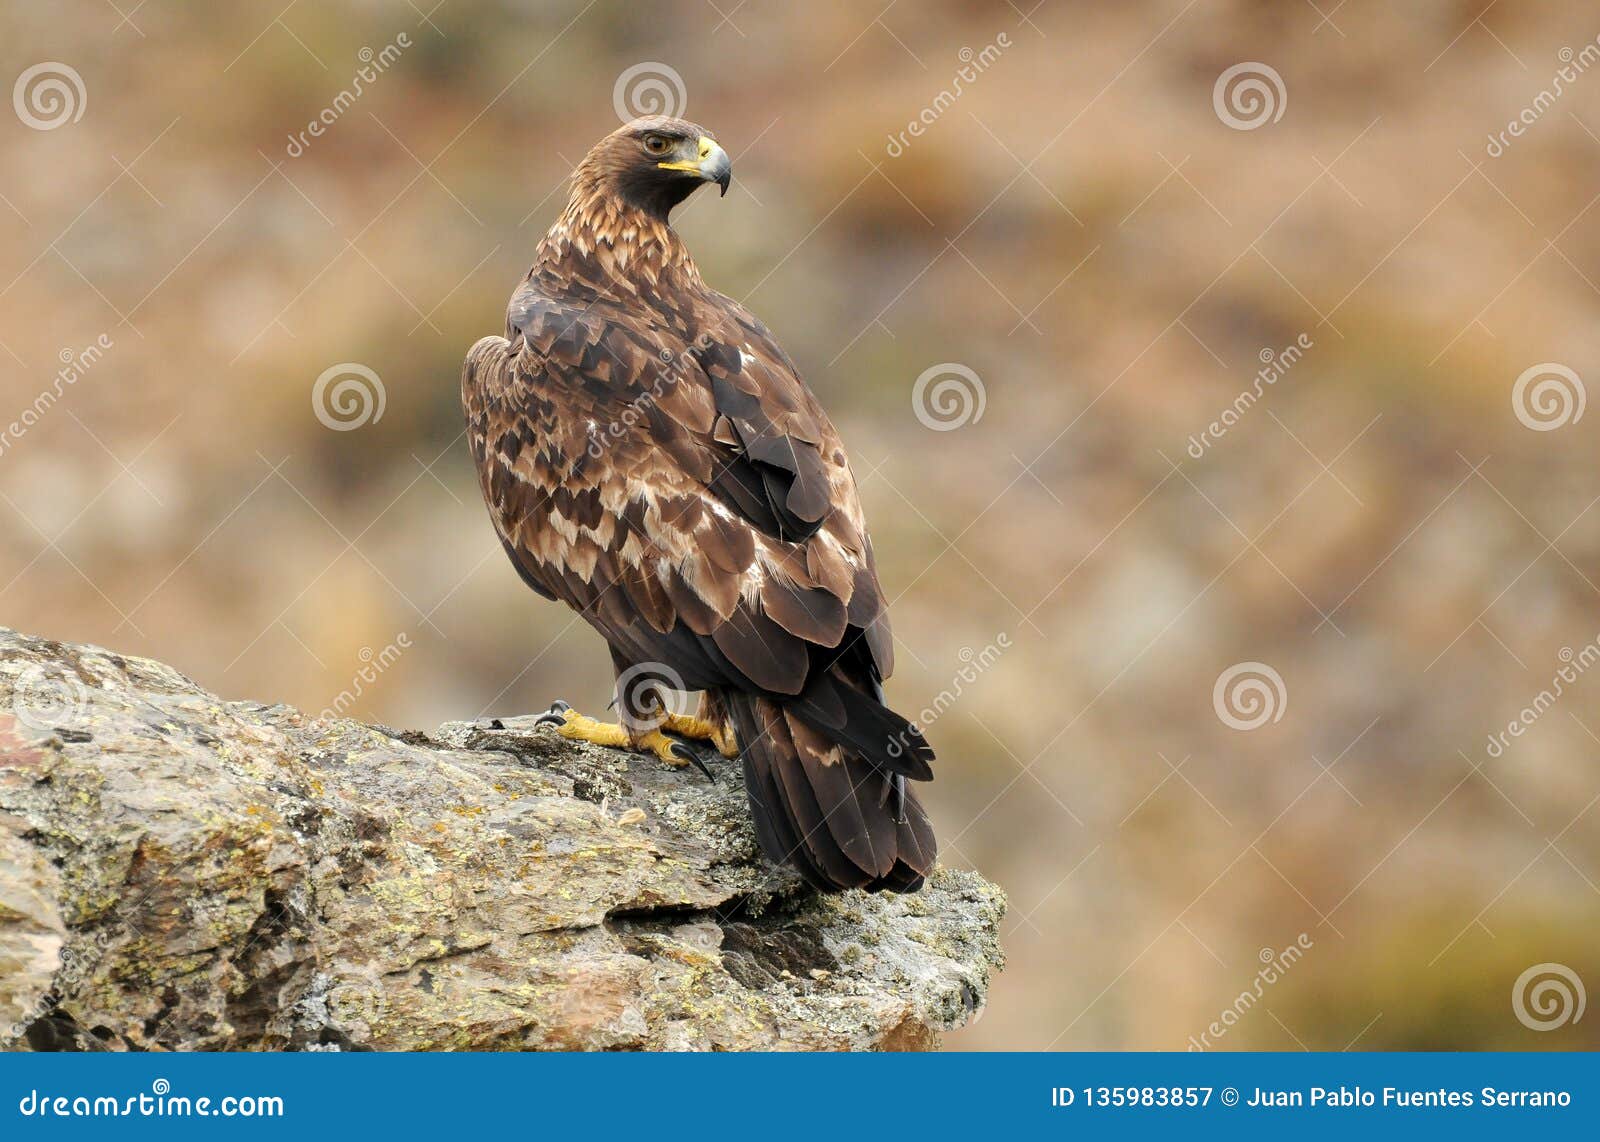 female royal eagle watches from the rock